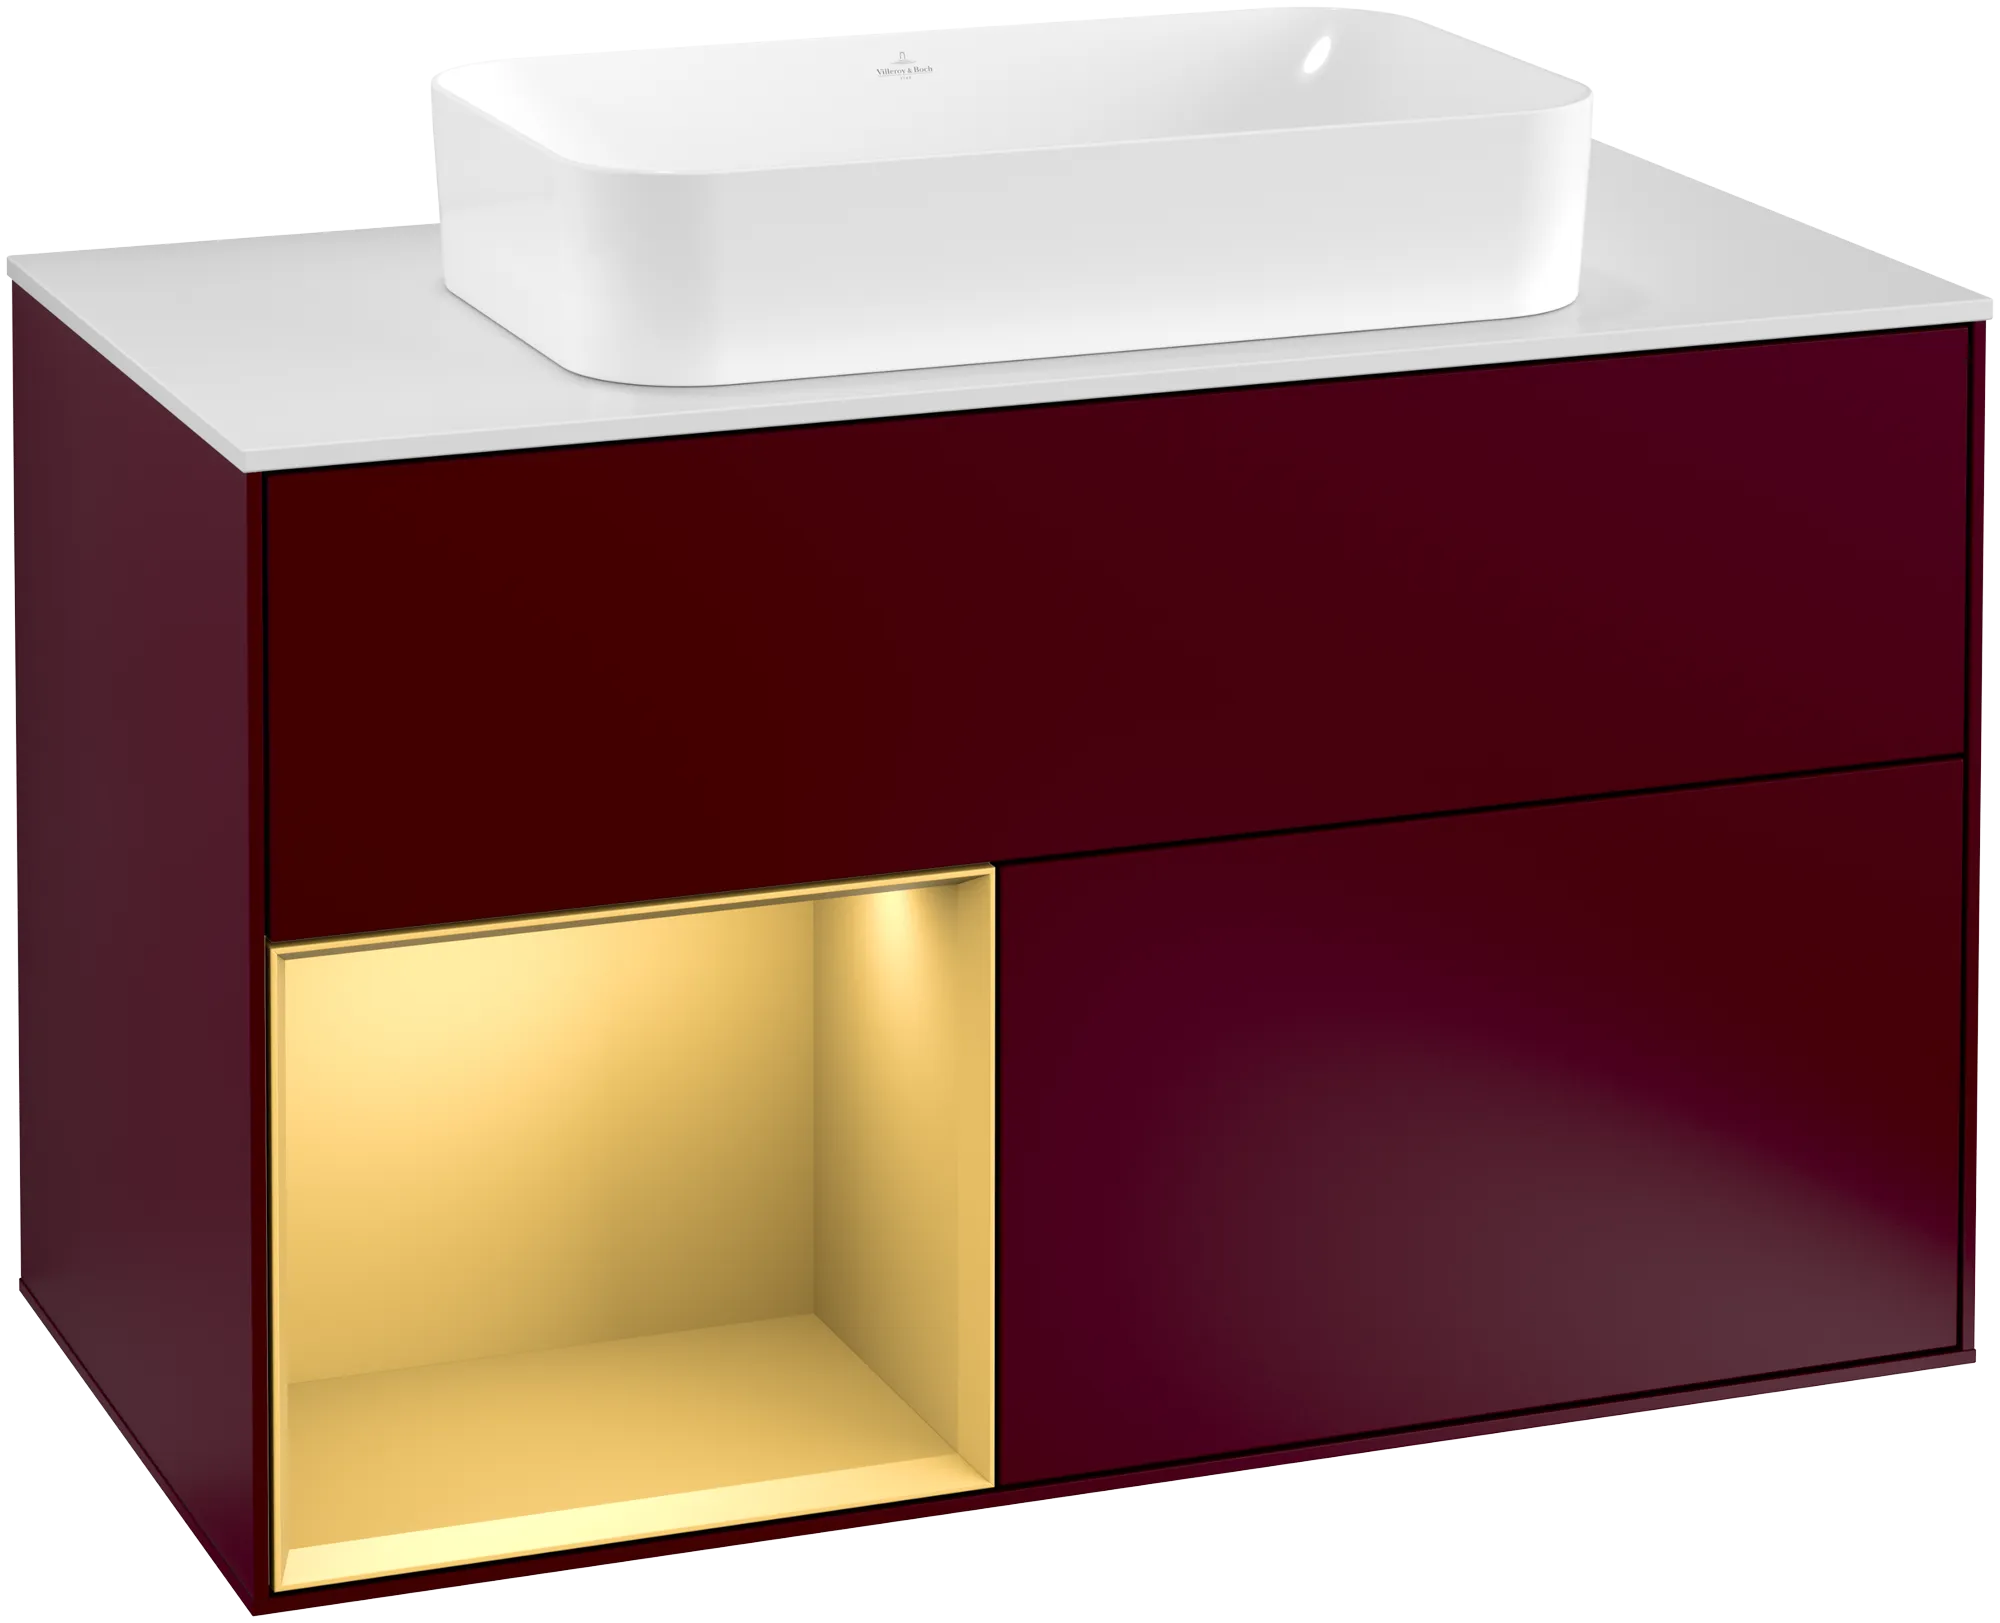 Picture of VILLEROY BOCH Finion Vanity unit, with lighting, 2 pull-out compartments, 1000 x 603 x 501 mm, Peony Matt Lacquer / Gold Matt Lacquer / Glass White Matt #G241HFHB